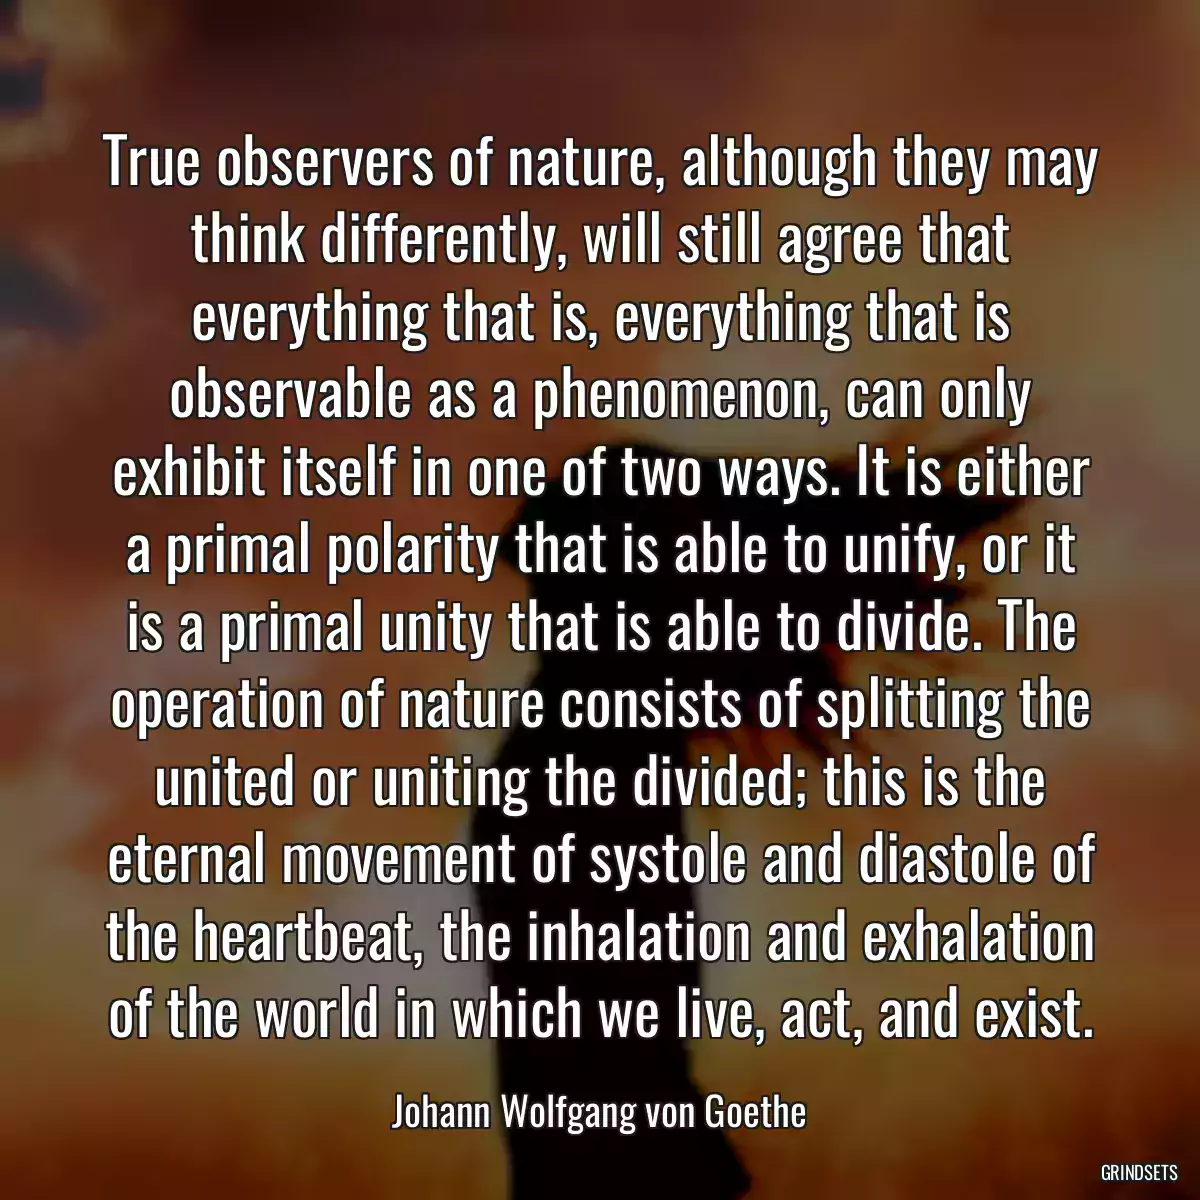 True observers of nature, although they may think differently, will still agree that everything that is, everything that is observable as a phenomenon, can only exhibit itself in one of two ways. It is either a primal polarity that is able to unify, or it is a primal unity that is able to divide. The operation of nature consists of splitting the united or uniting the divided; this is the eternal movement of systole and diastole of the heartbeat, the inhalation and exhalation of the world in which we live, act, and exist.